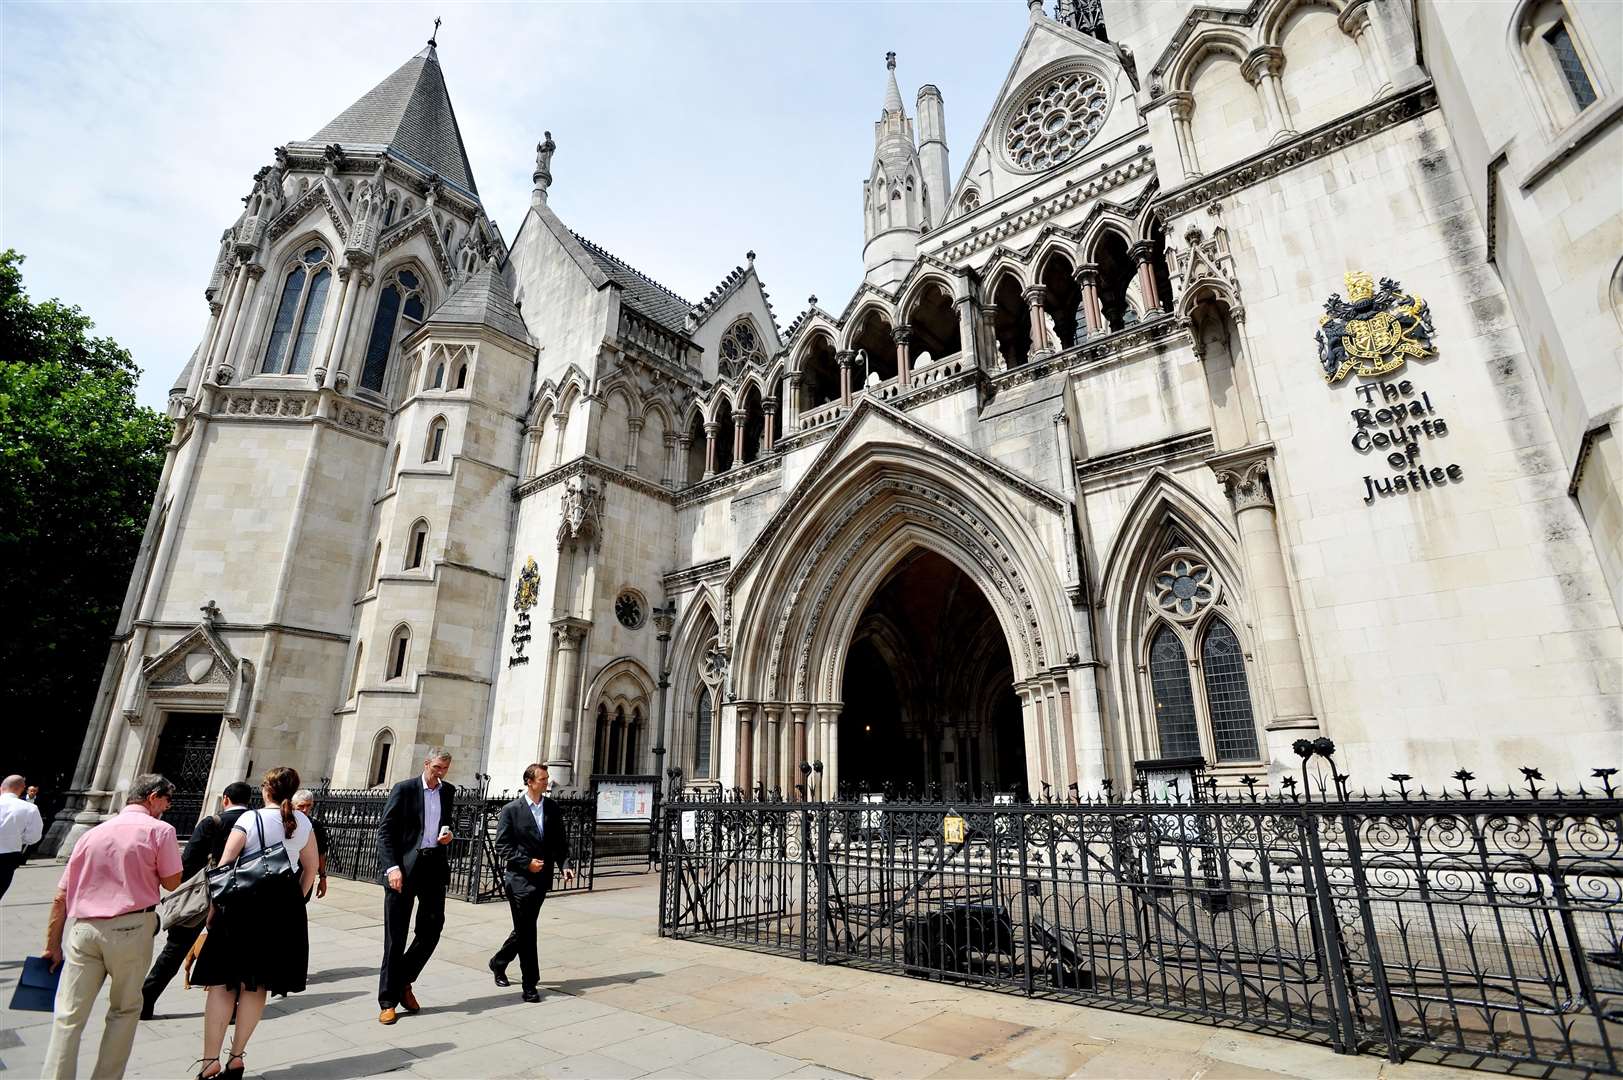 Thursday’s hearing was held at the Royal Courts of Justice in London (Nick Ansell/PA)